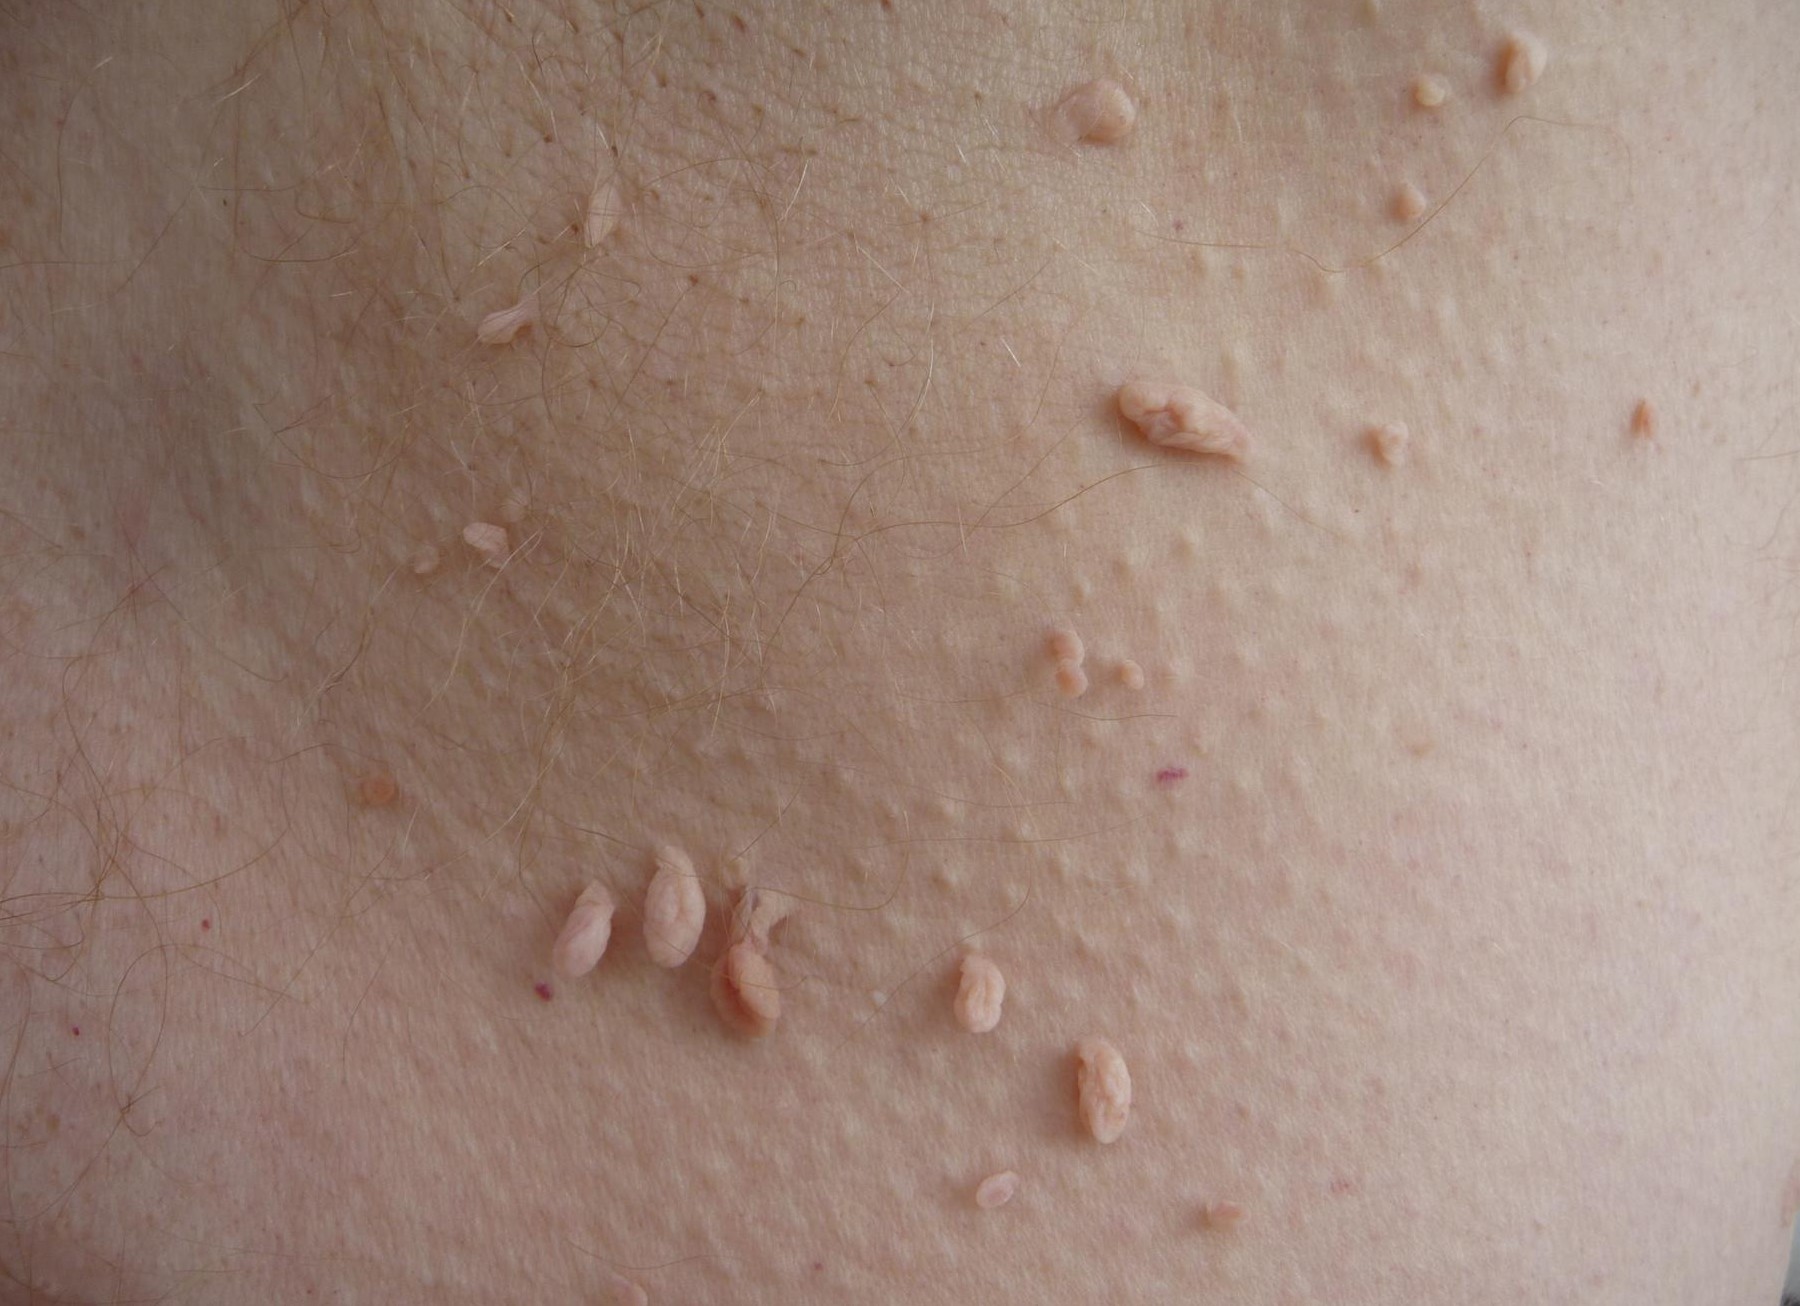 images of skin tags